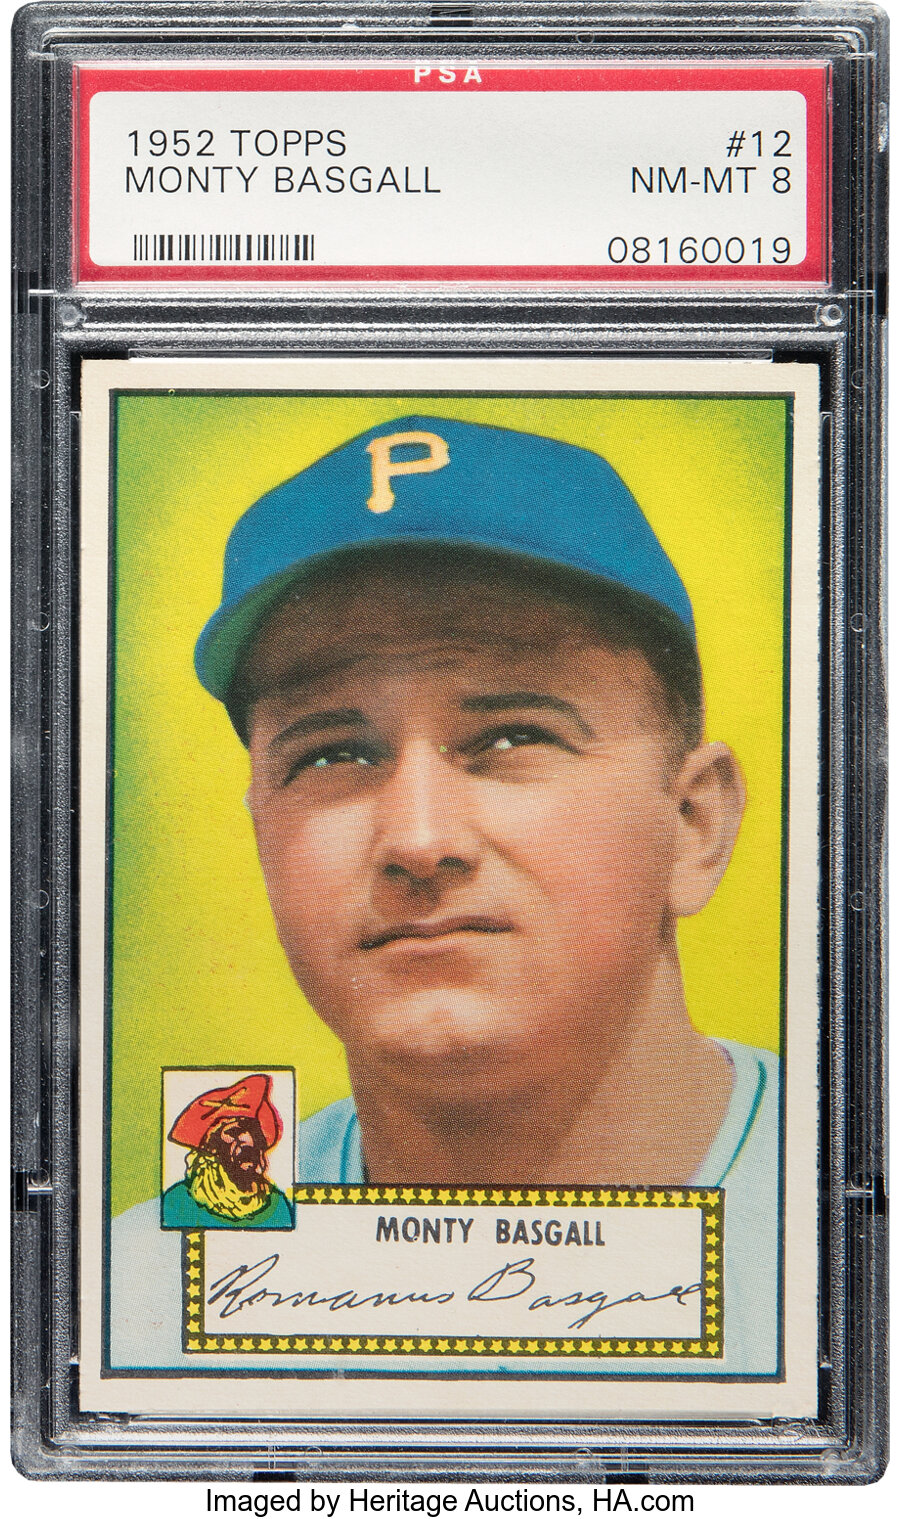 1952 Topps Monty Basgall Rookie #12 PSA NM-MT 8 - Only Three Higher!